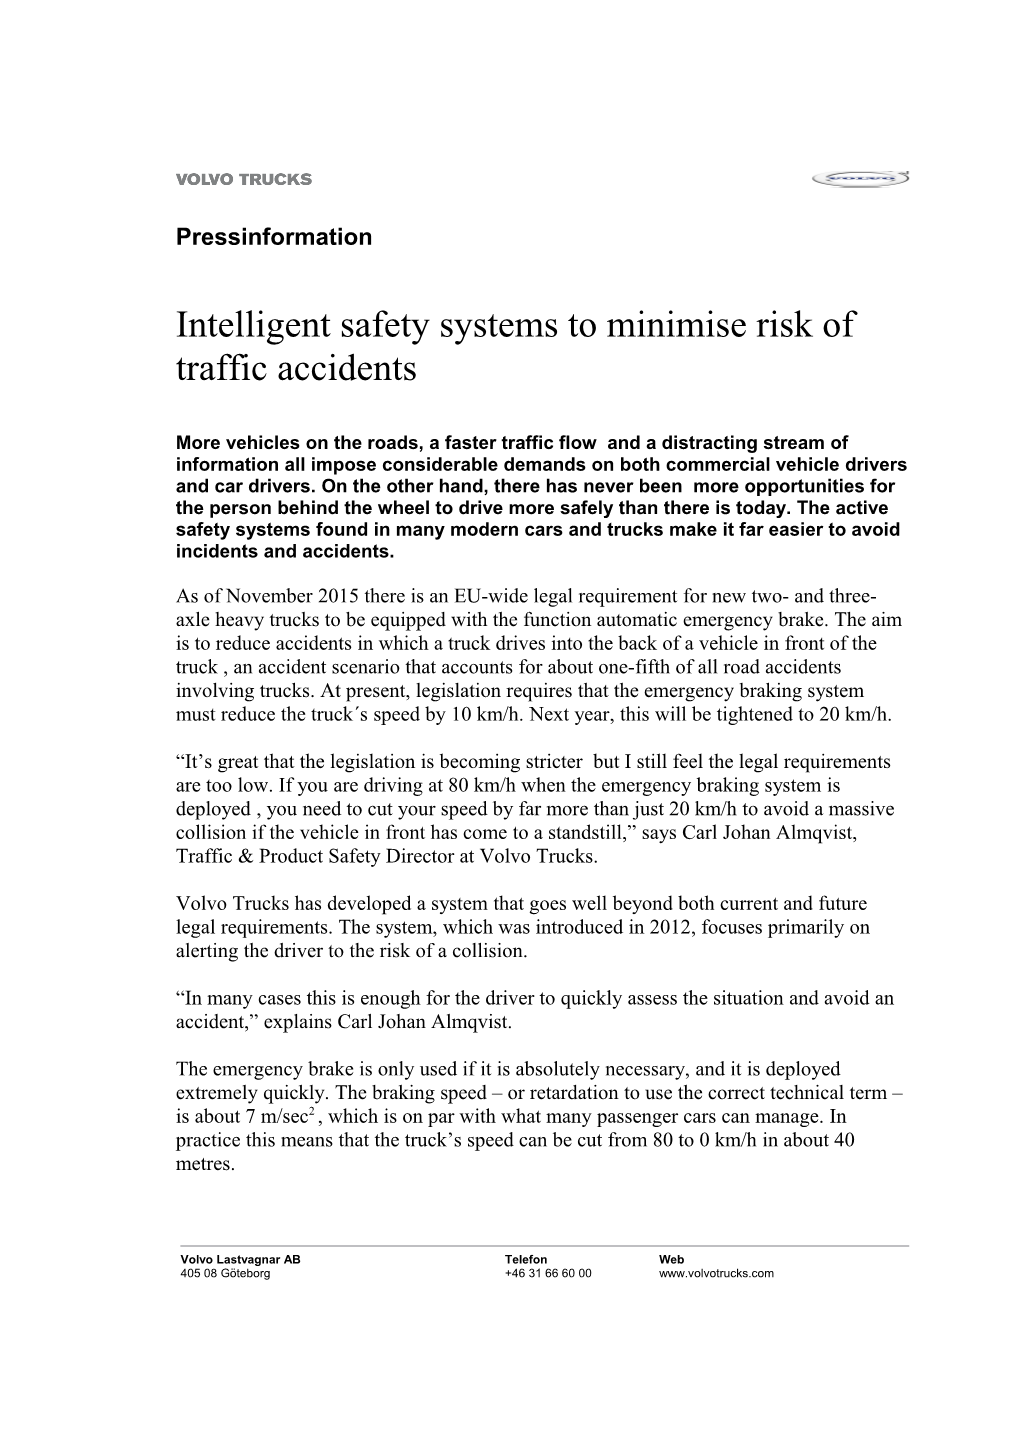 Intelligent Safety Systems to Minimise Risk of Traffic Accidents